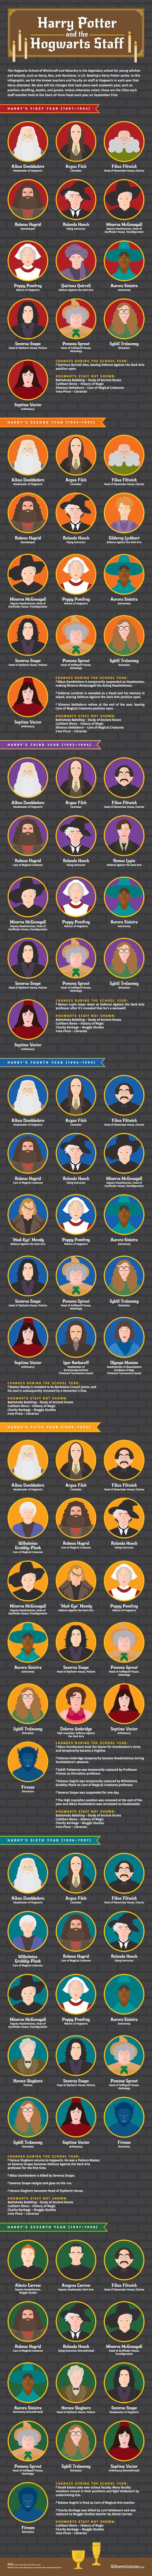 Harry Potter’s Ever-Shifting Hogwarts Faculty – An Infographic